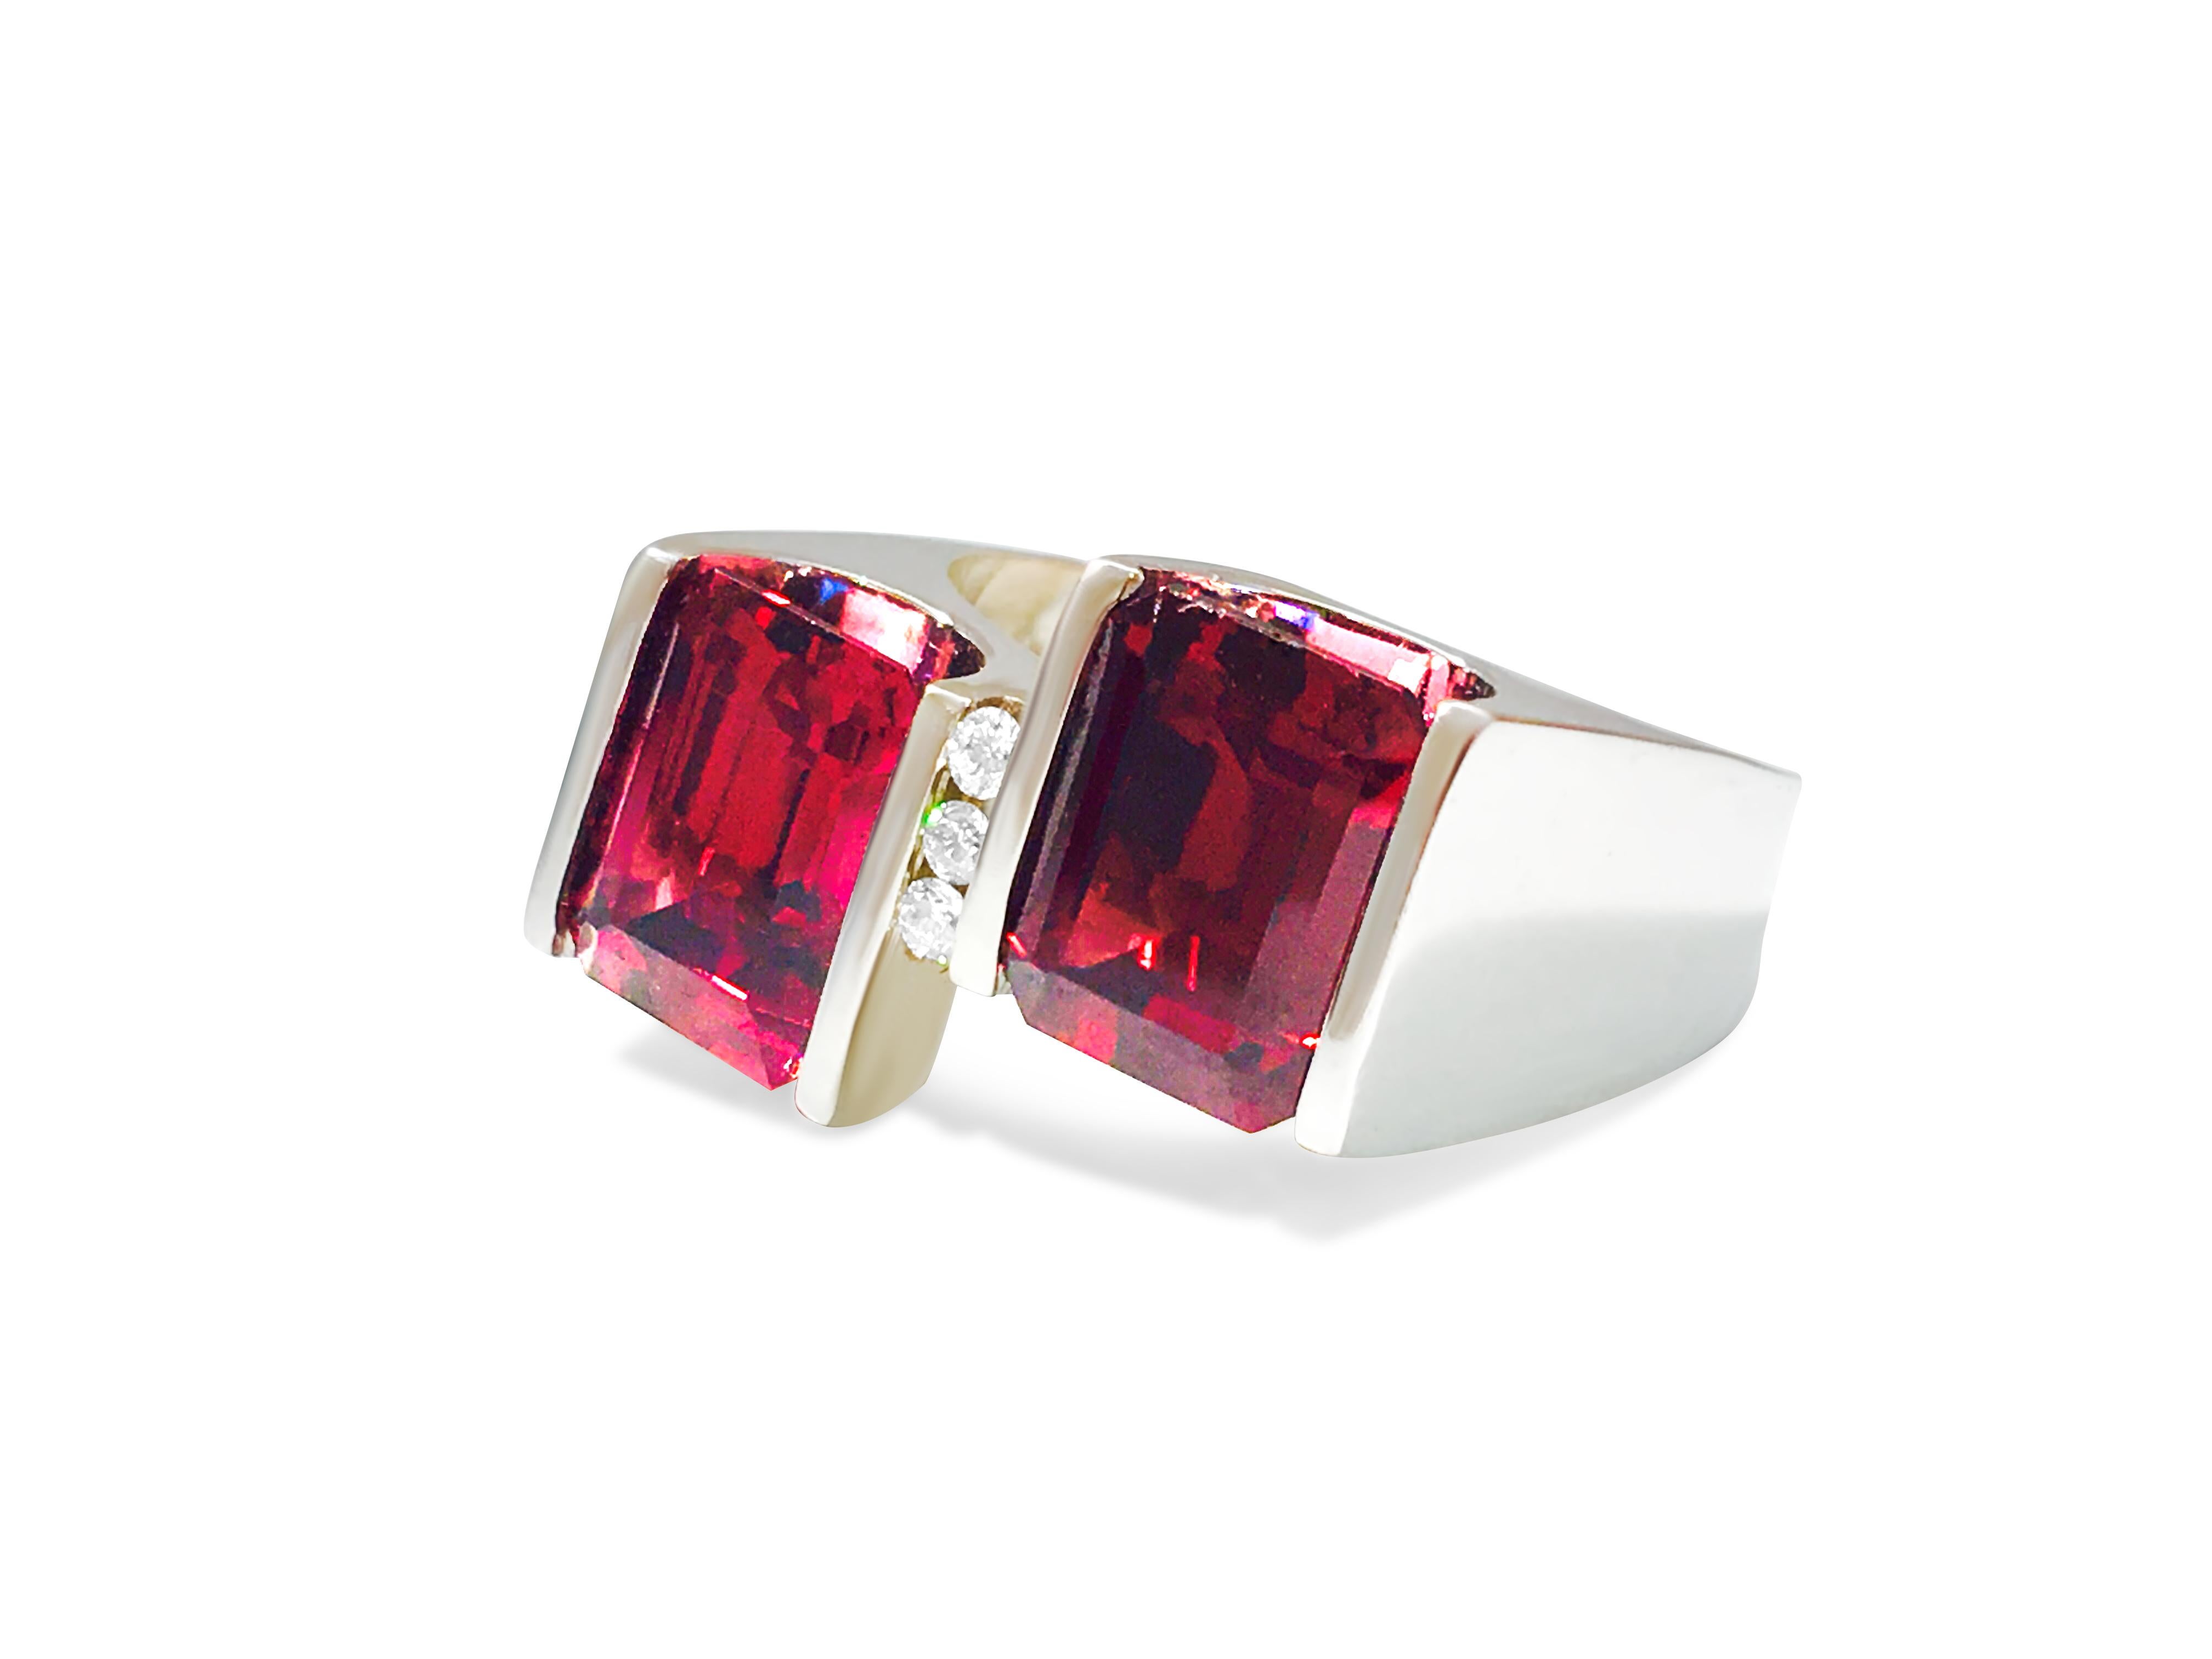 Indulge in the timeless allure of this vintage garnet ring, a striking testament to elegance and sophistication. With its deep red hue and intricate detailing, this ring exudes a sense of old-world charm and romance. Perfect for adding a touch of